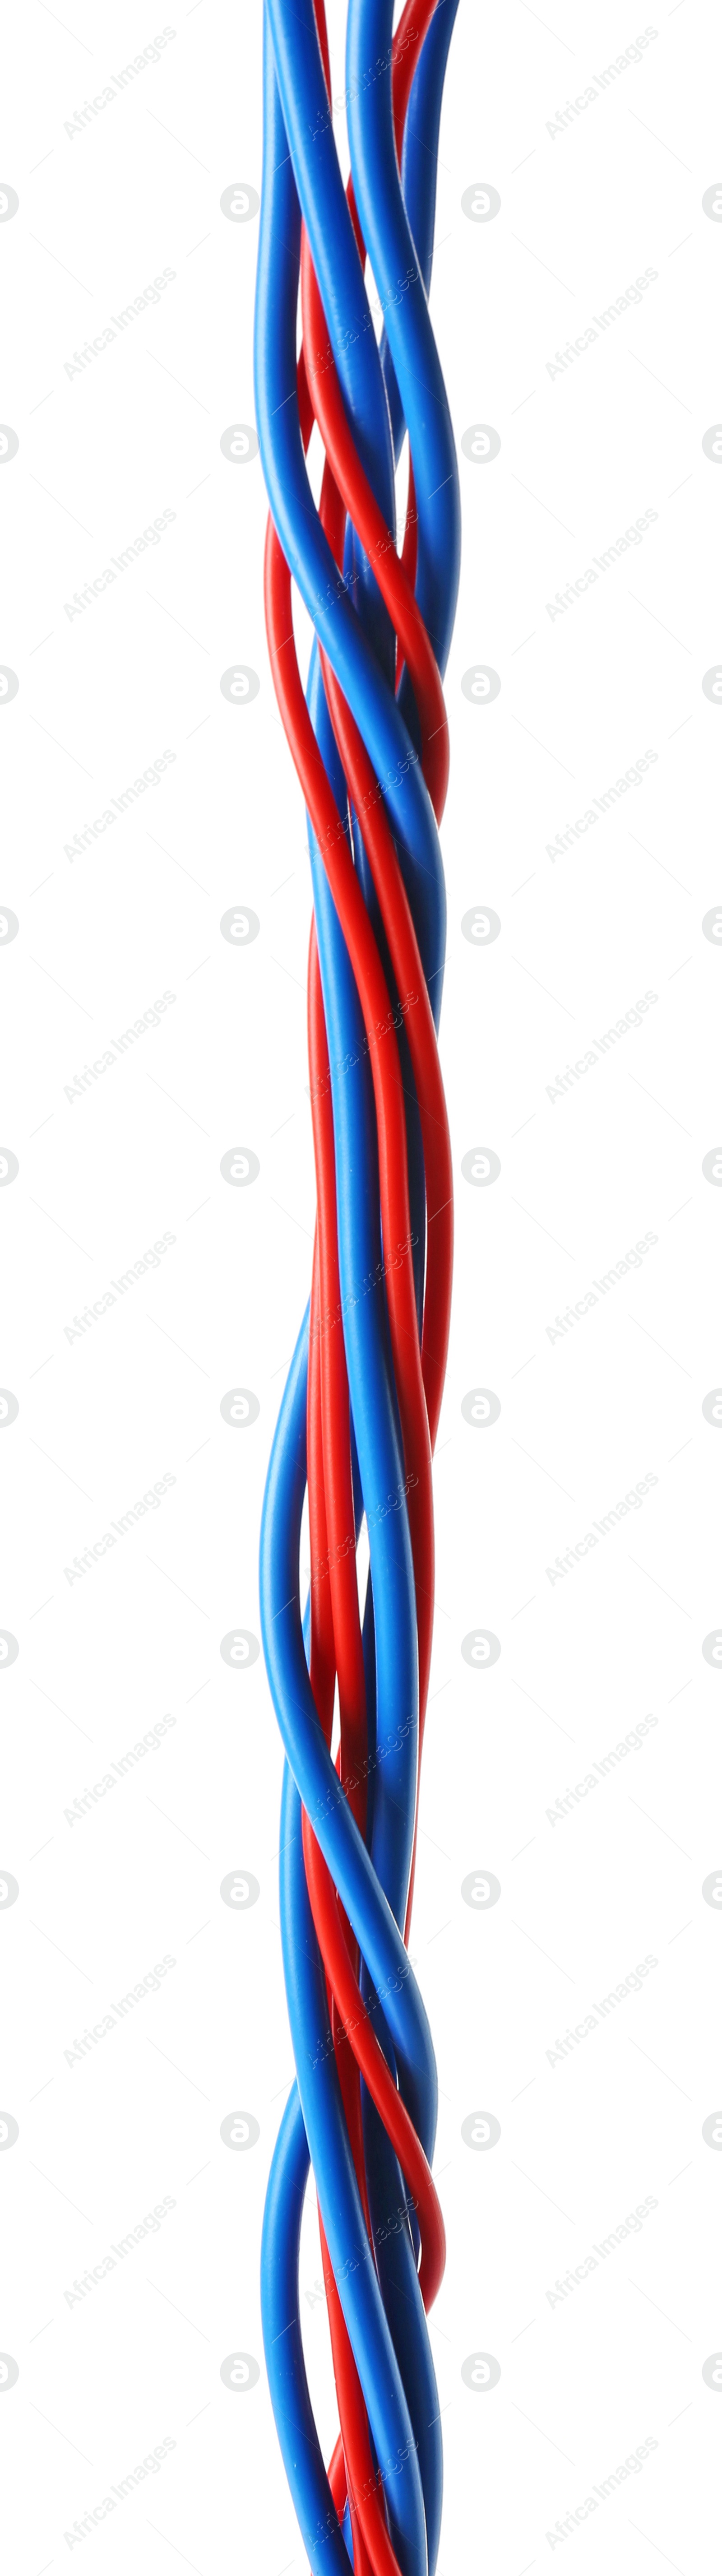 Photo of New colorful electrical wires isolated on white